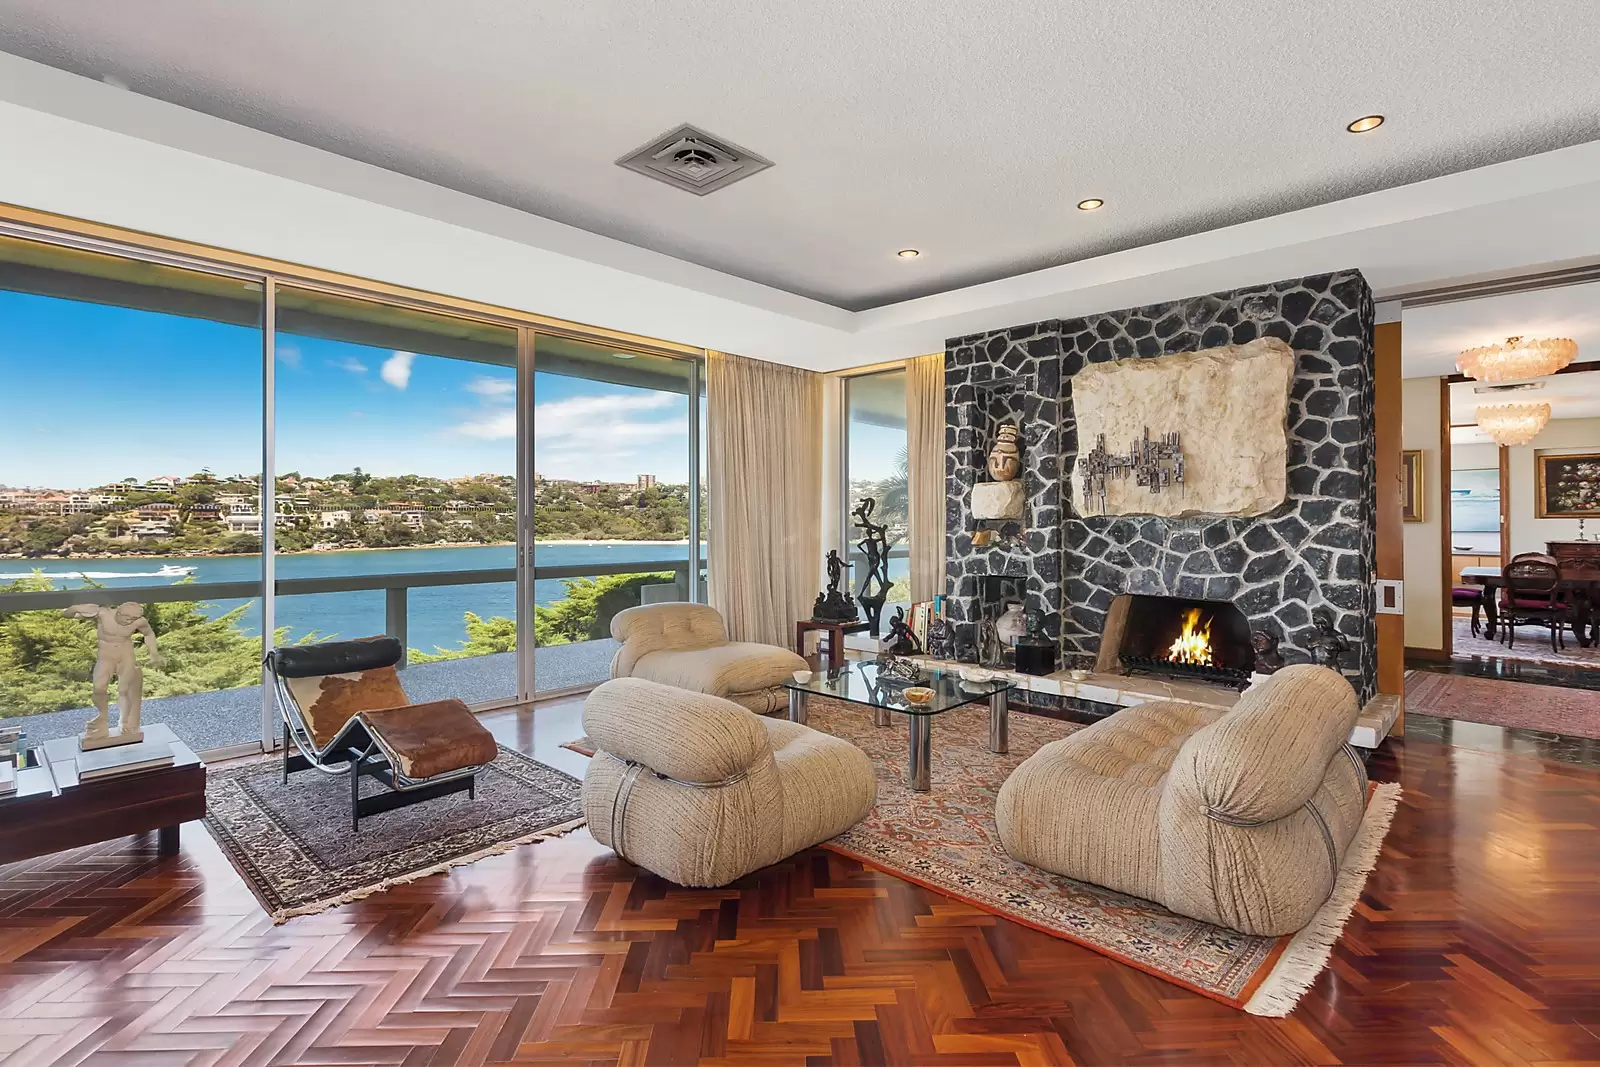 Photo #4: 1-3 Amiens Road, Clontarf - Sold by Sydney Sotheby's International Realty